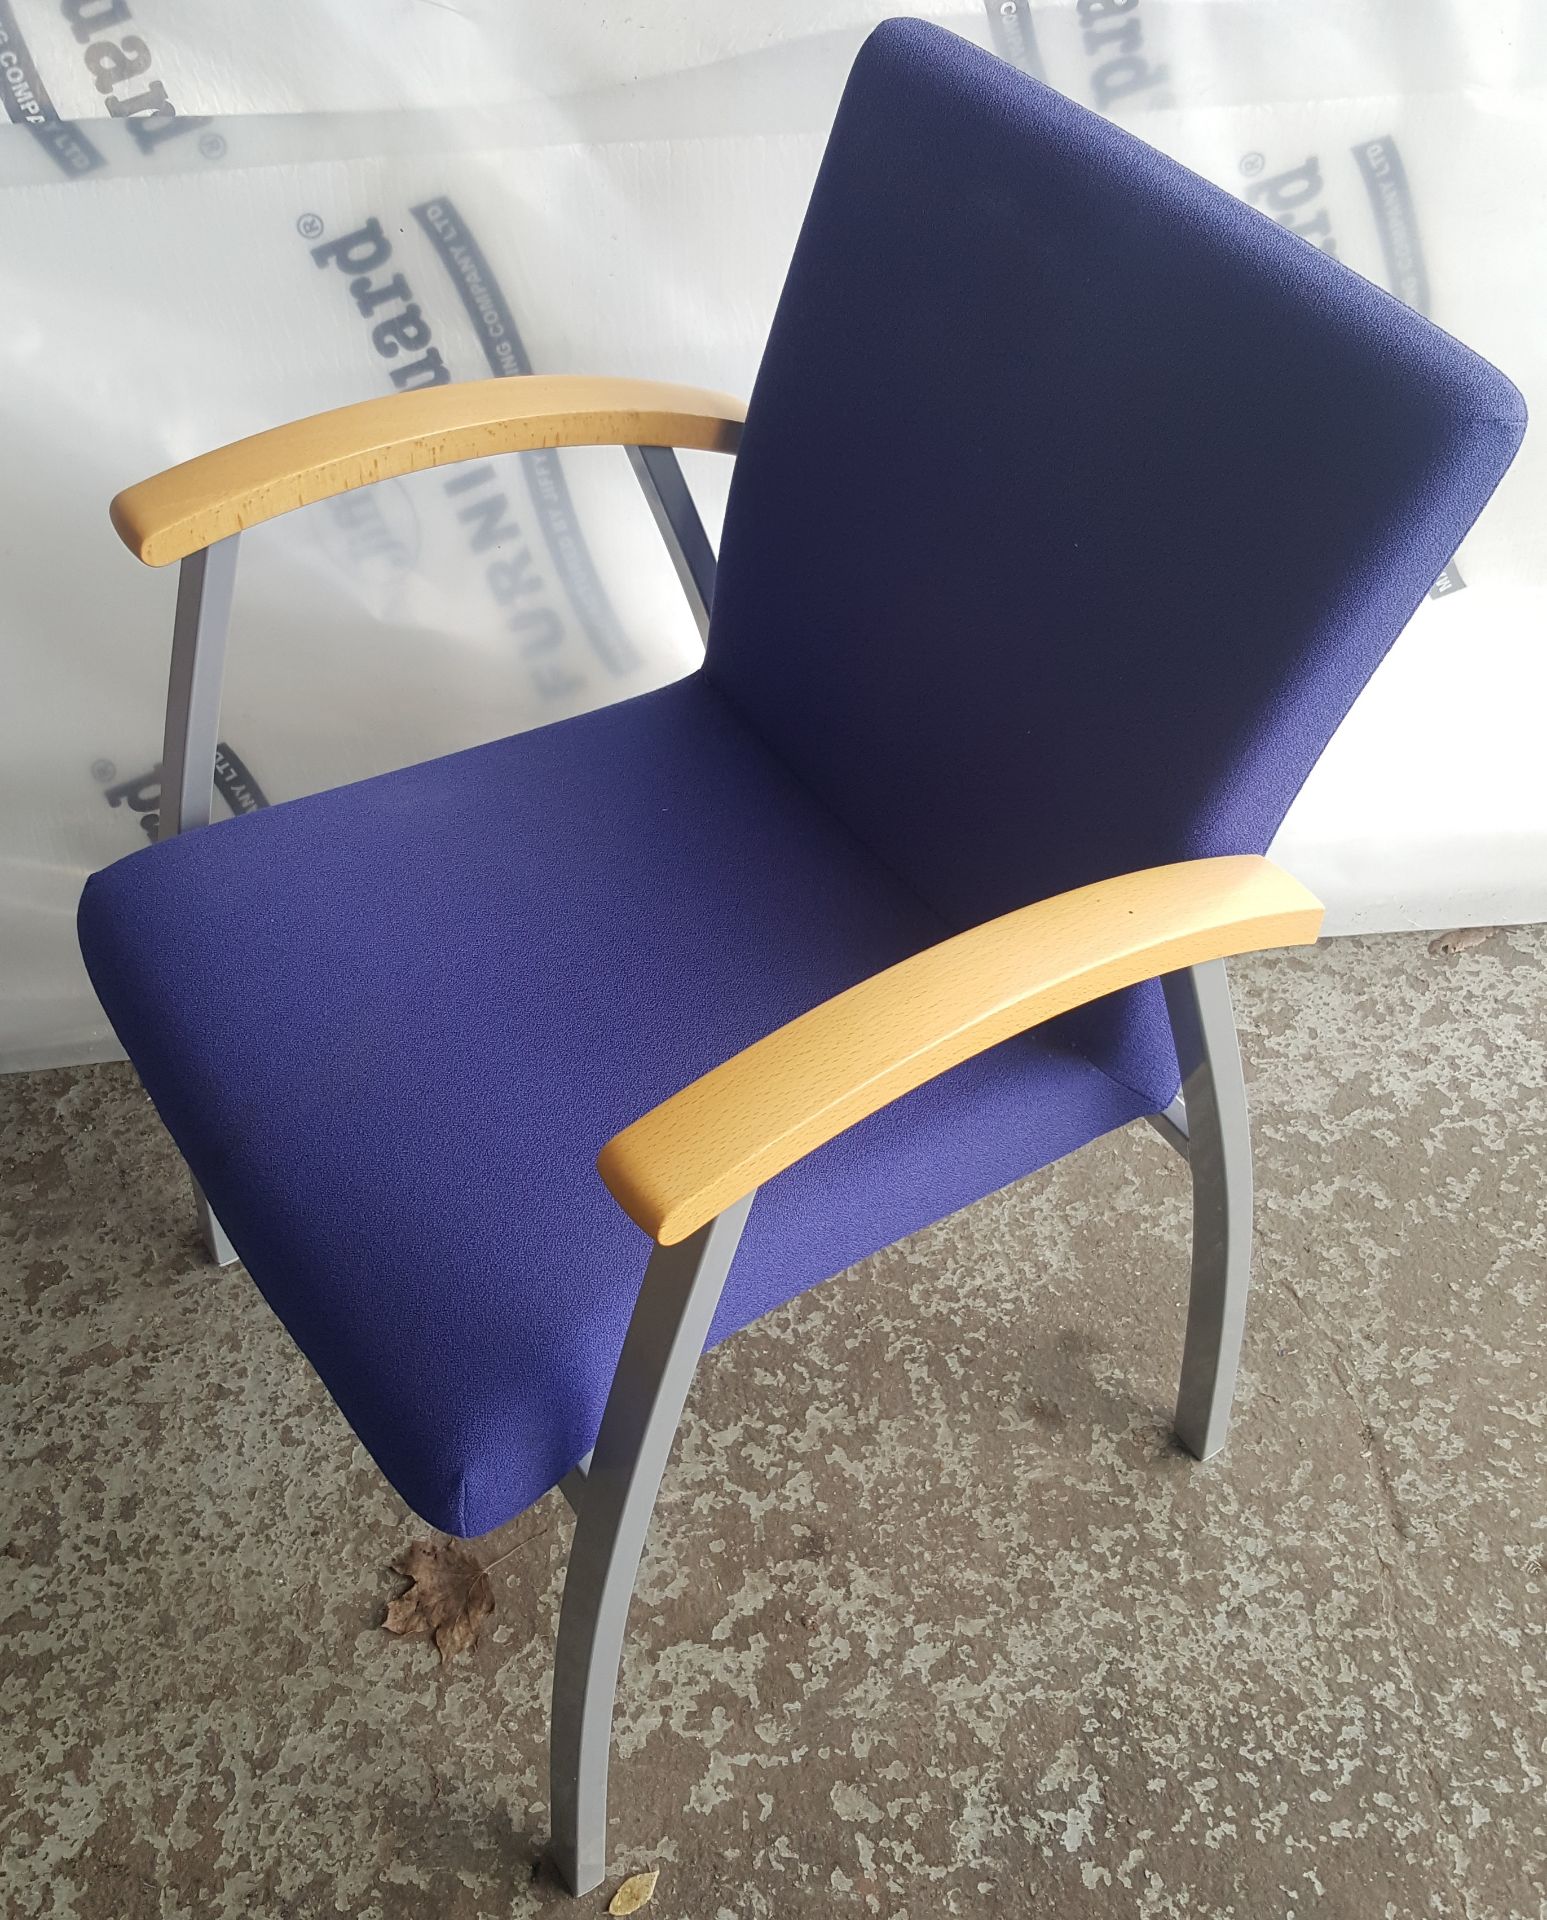 6 x Royal Blue Fabric Stackable Office Chairs - REF: TofT - CL011 - Location: Altrincham WA14 - Image 6 of 6